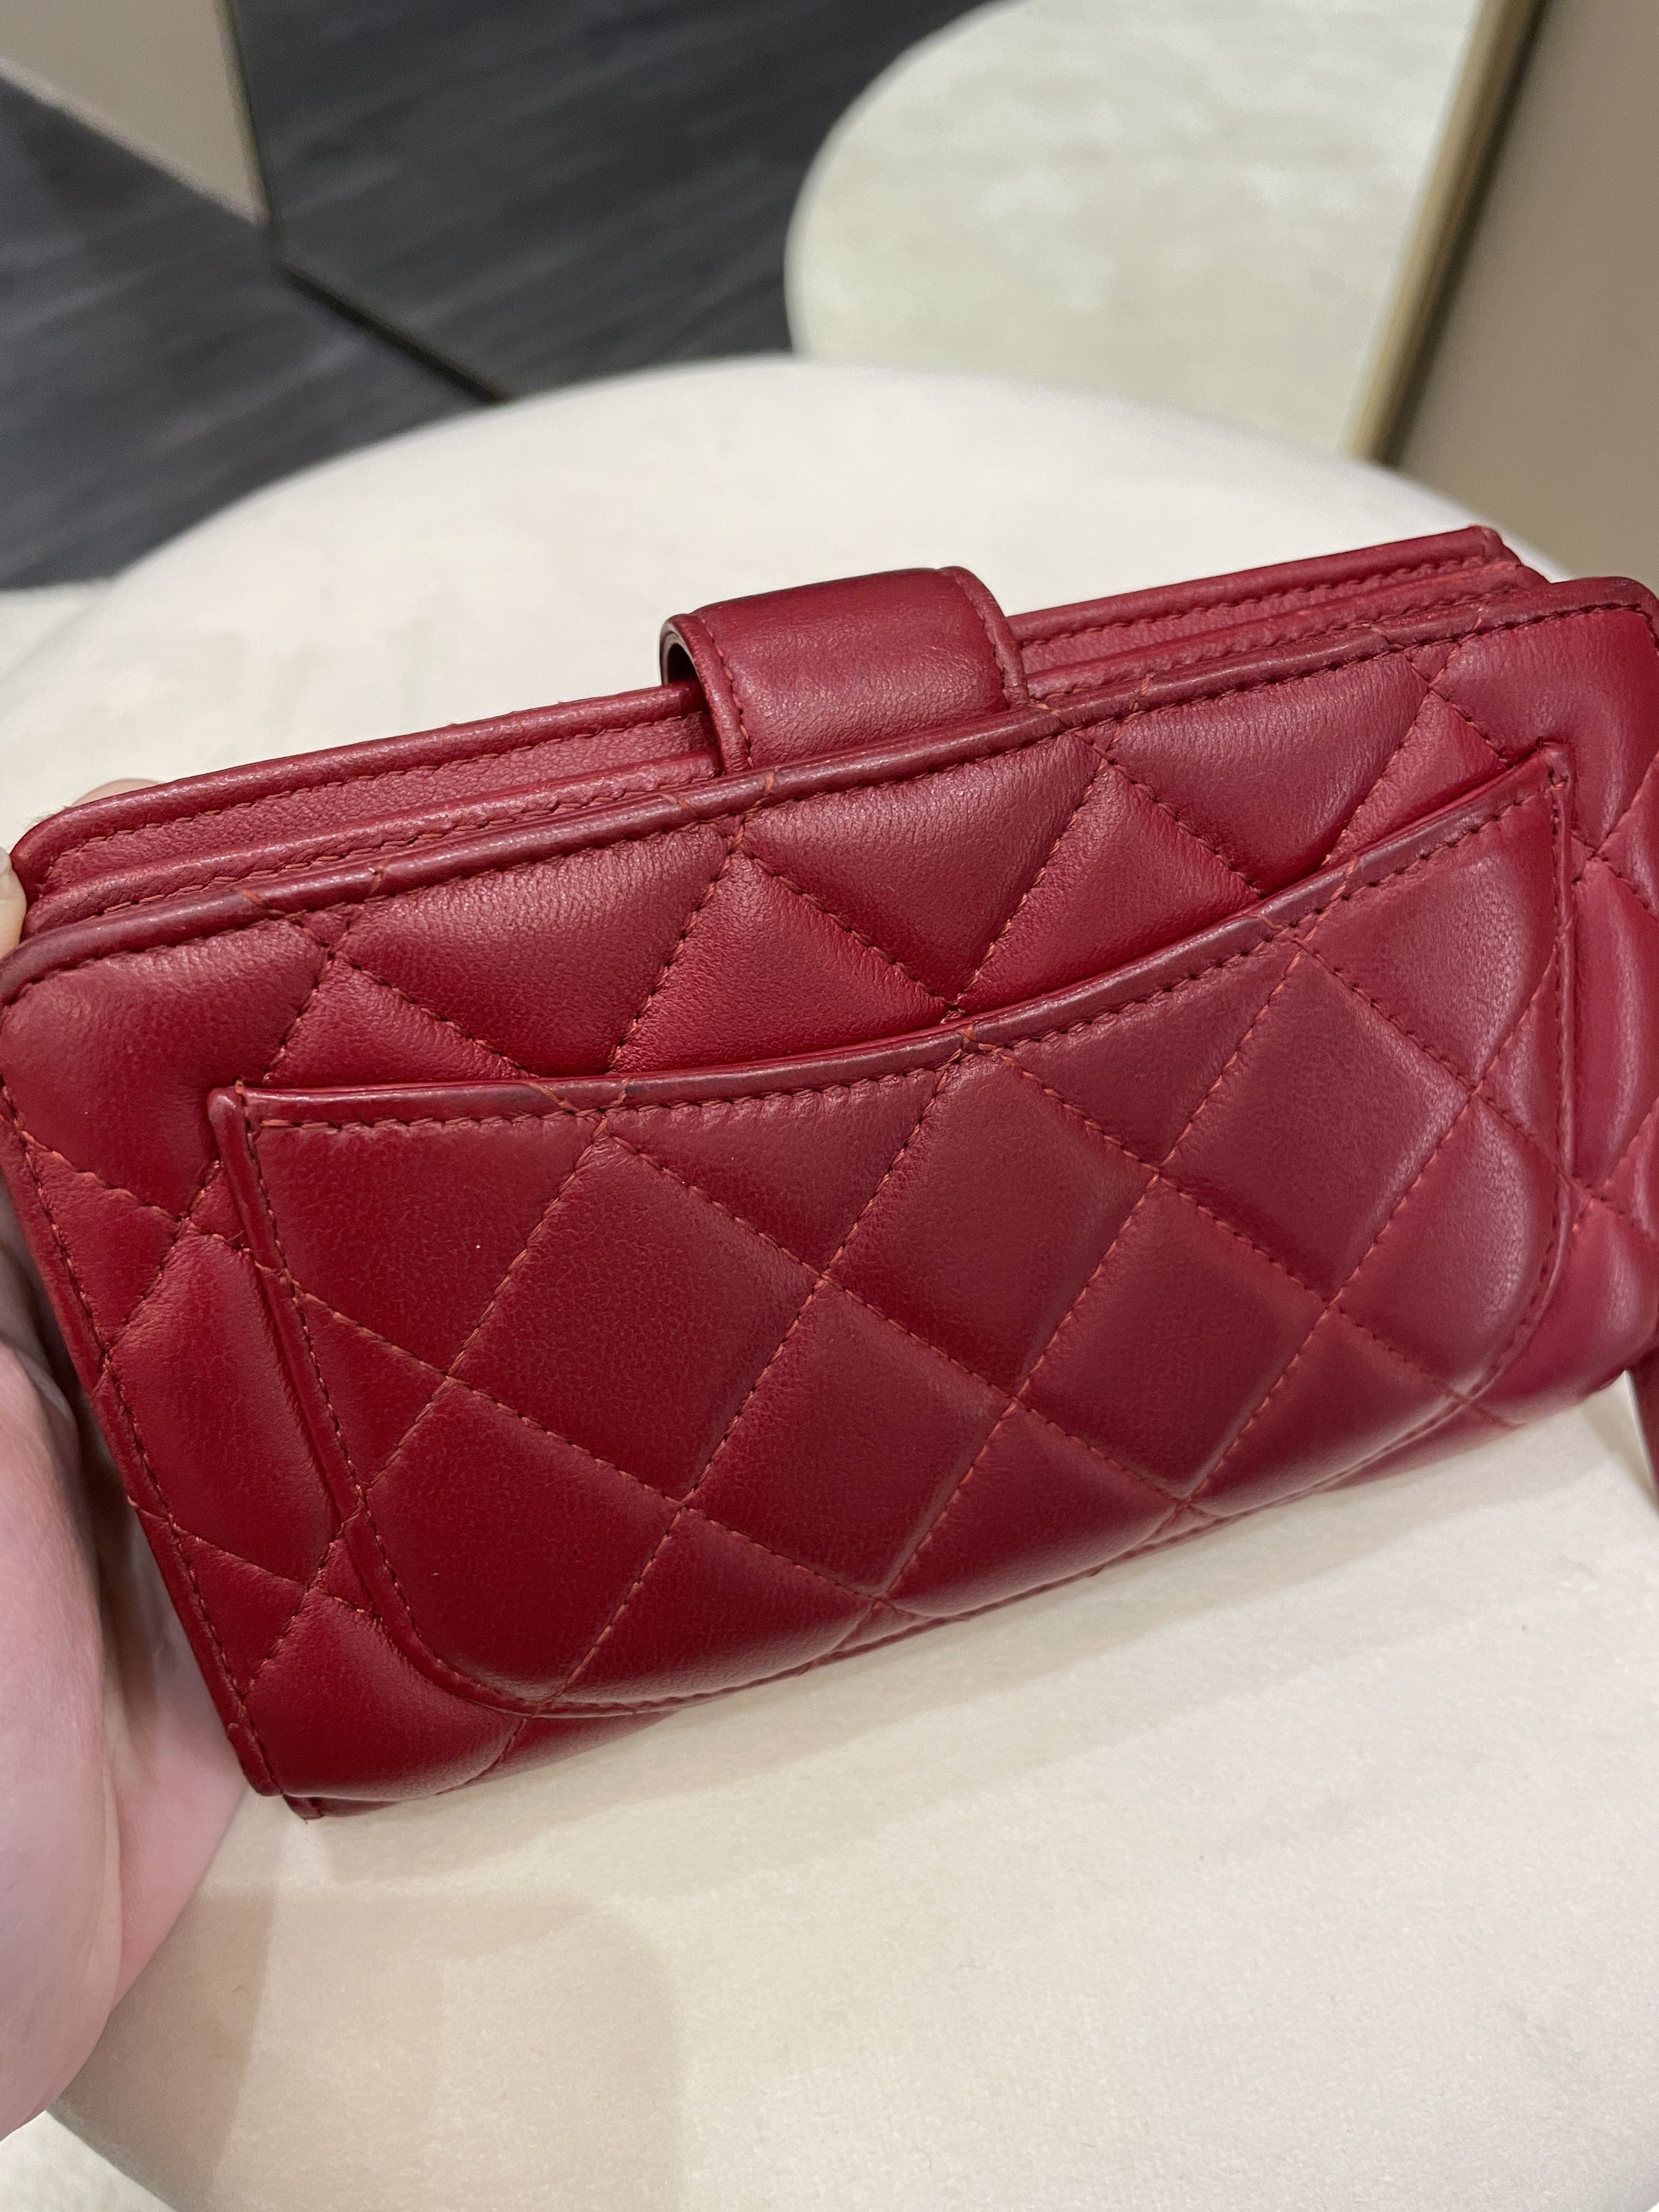 My Sister's Closet  Chanel Chanel Size Small Red Velvet Quilted Wallet  Chain Handbag